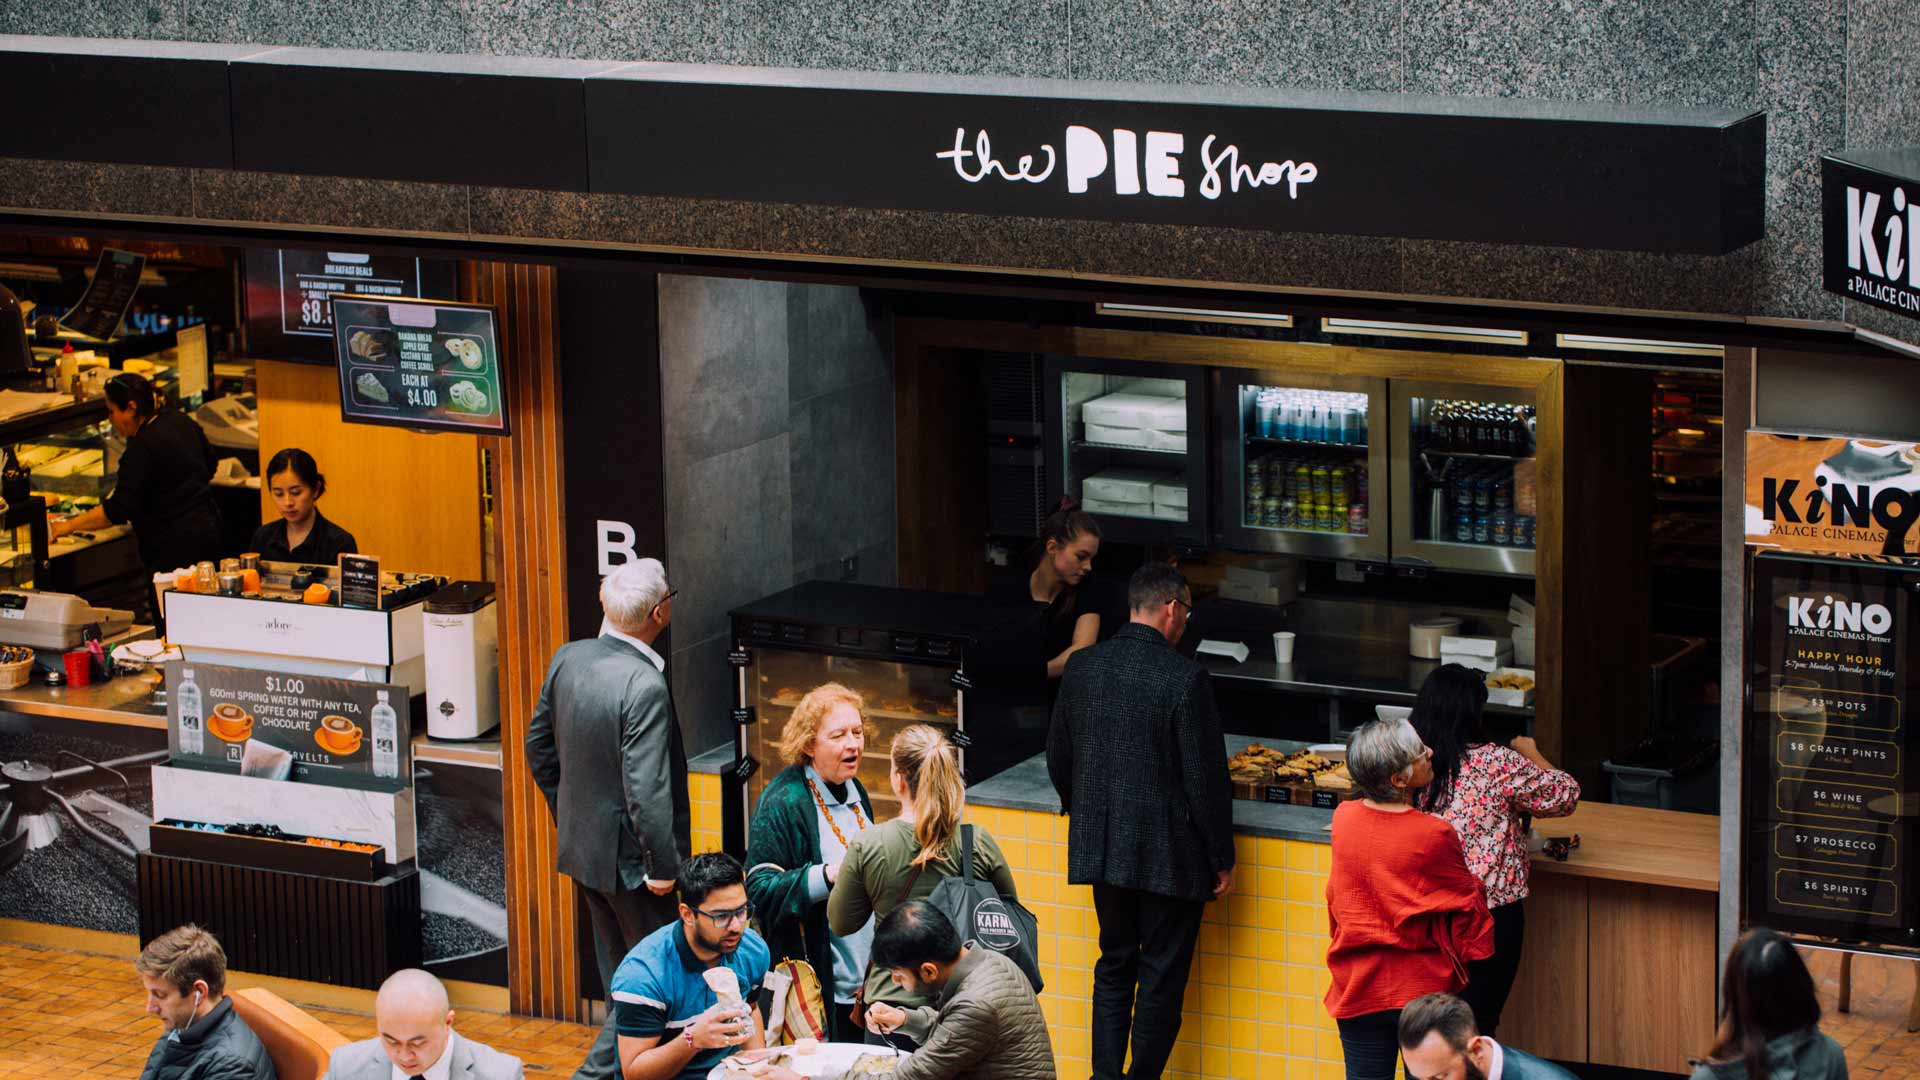 Brunswick East's Pie Shop Has Opened a New CBD Outpost So Good Riddance Soggy Desk Sandwiches